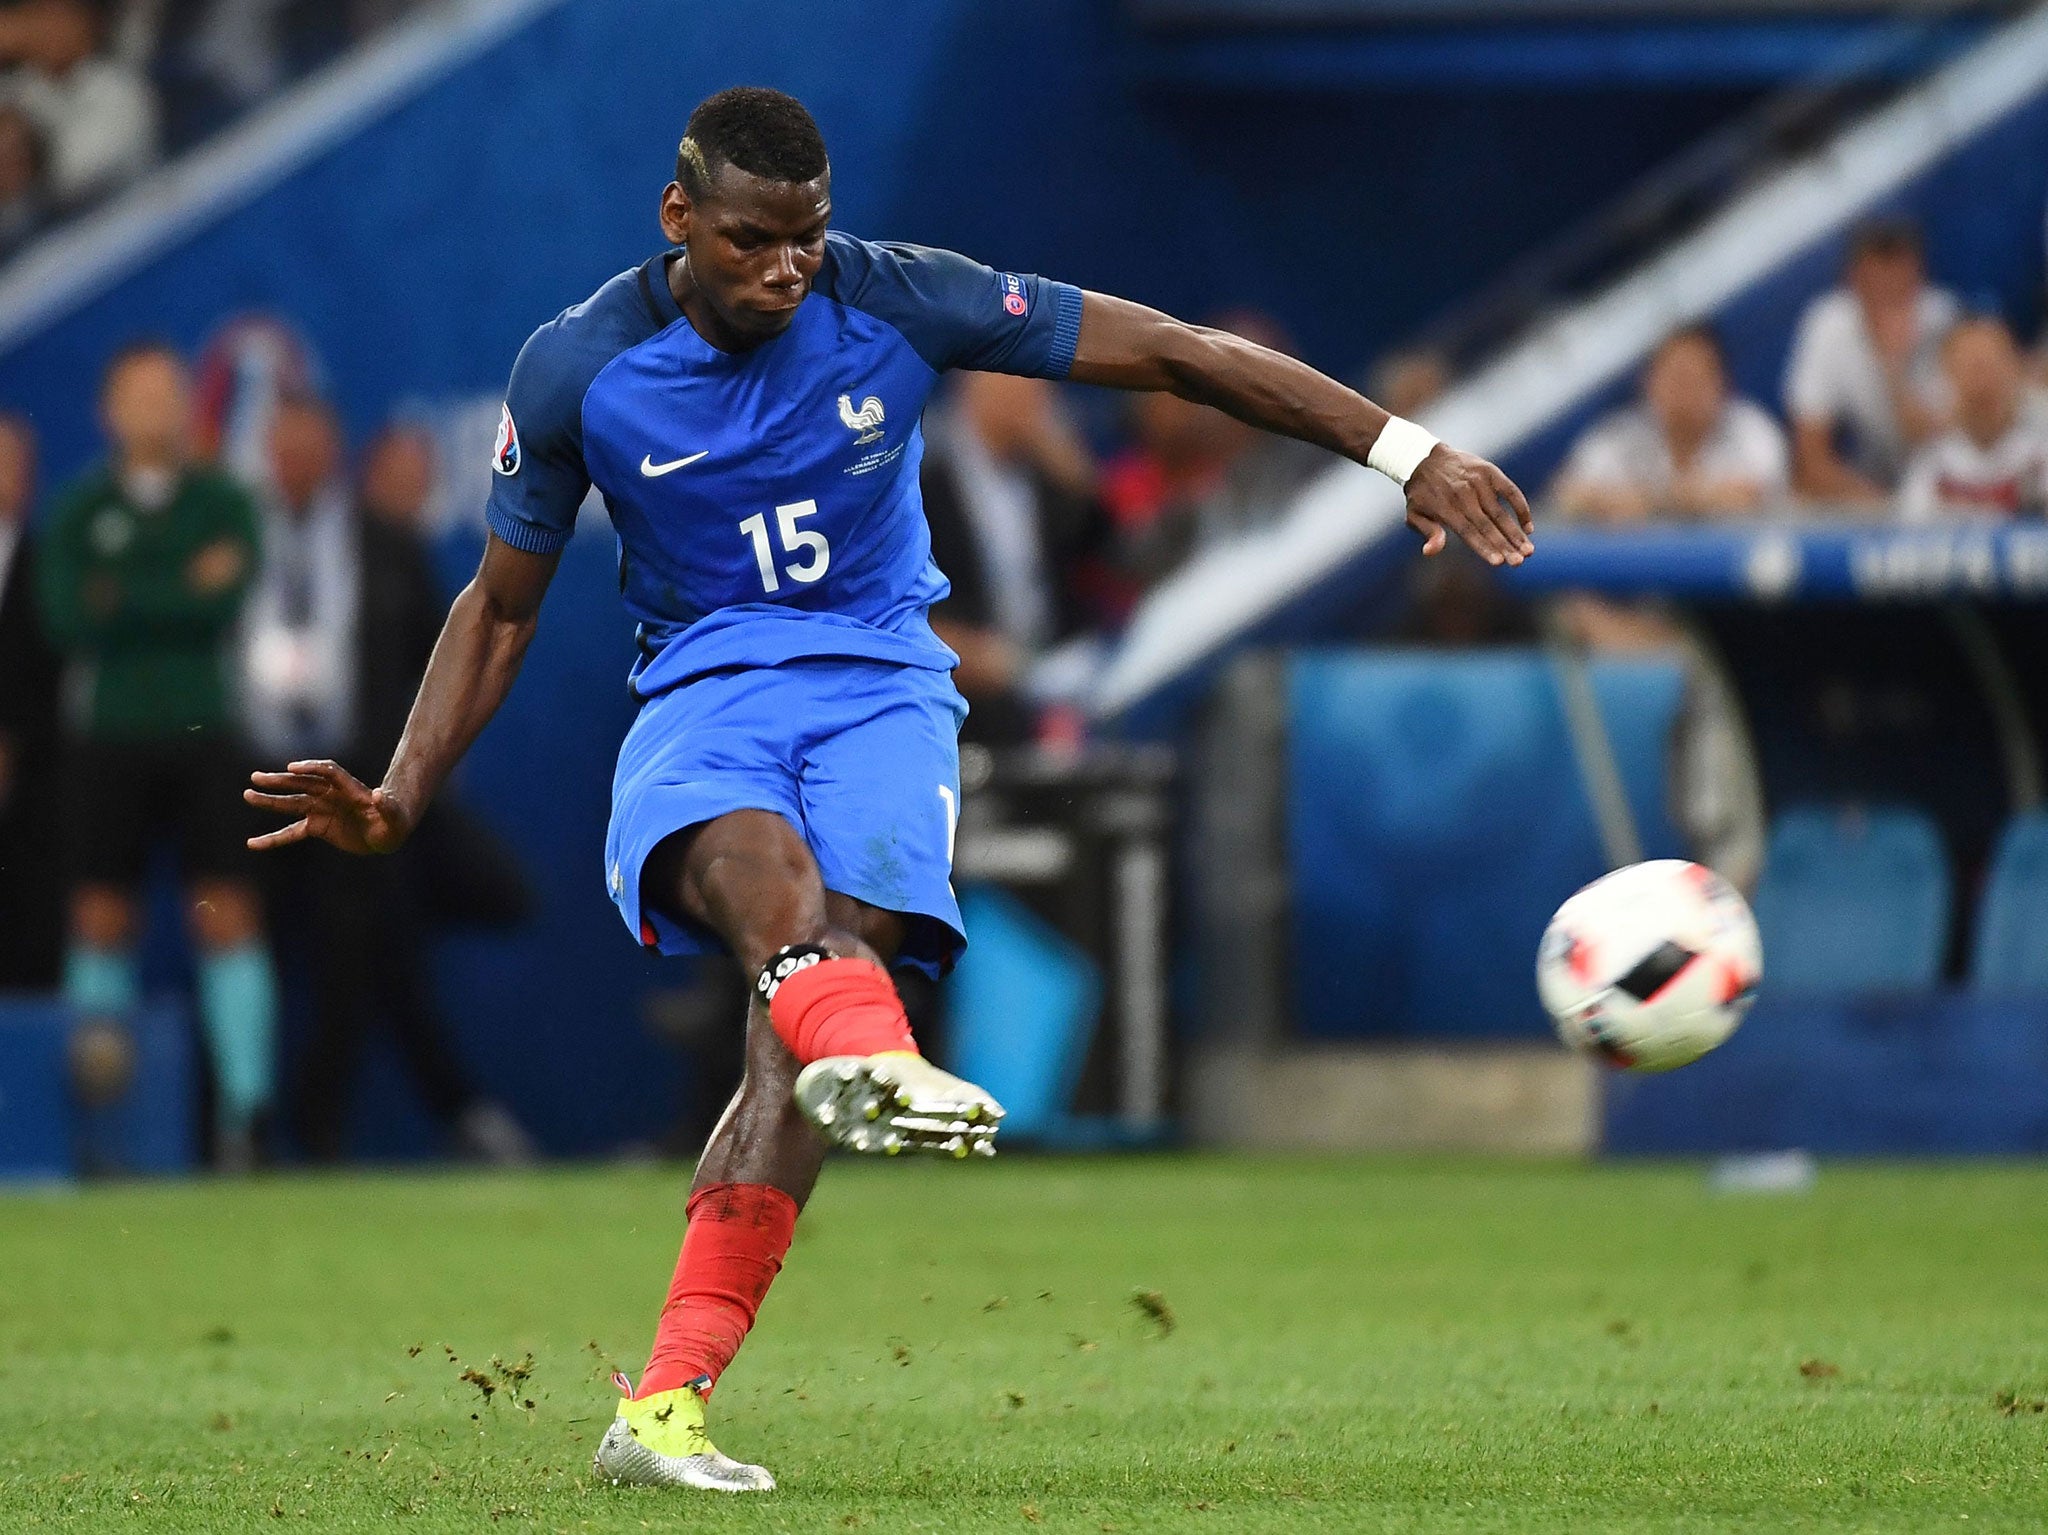 Paul Pogba on free-kick duty for France at Euro 2016